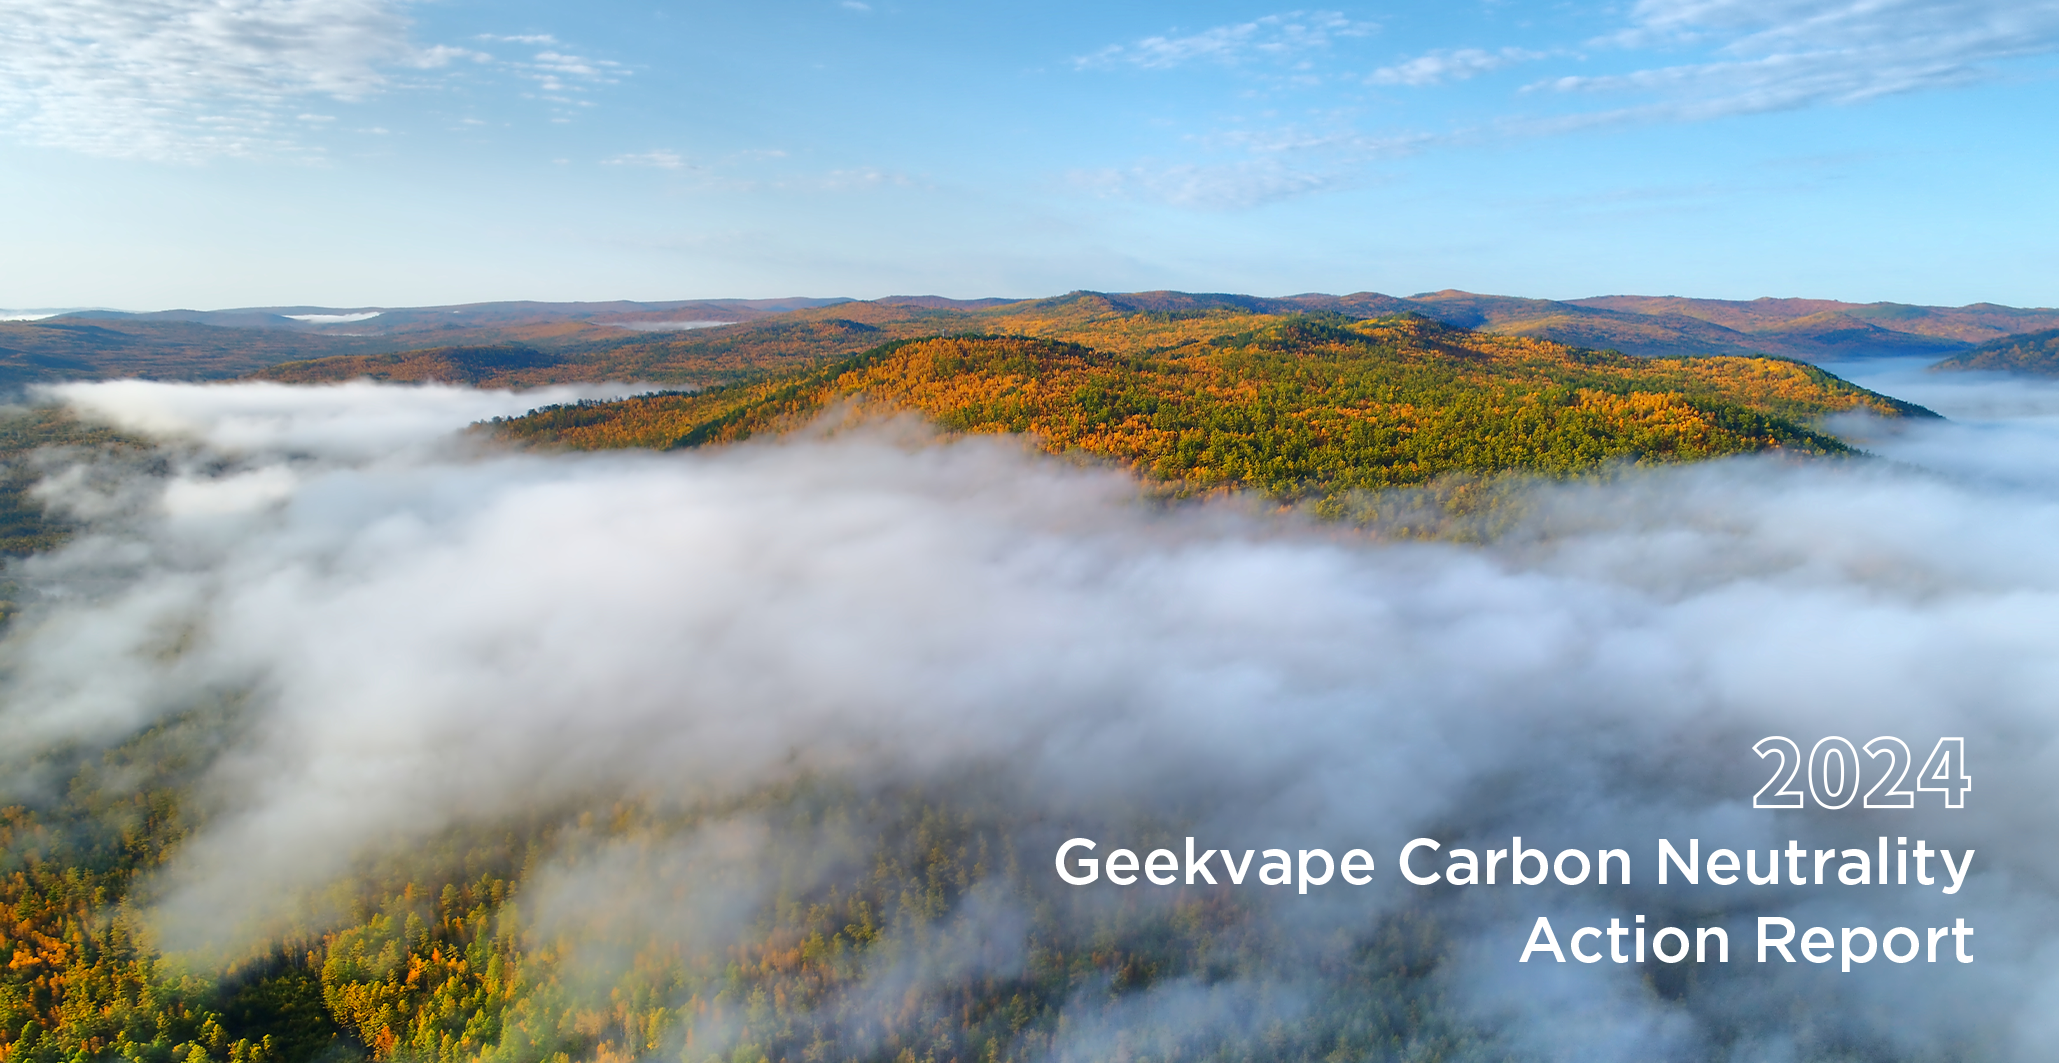 Geekvape released first Carbon Neutrality Action Report to build a green and low-carbon future